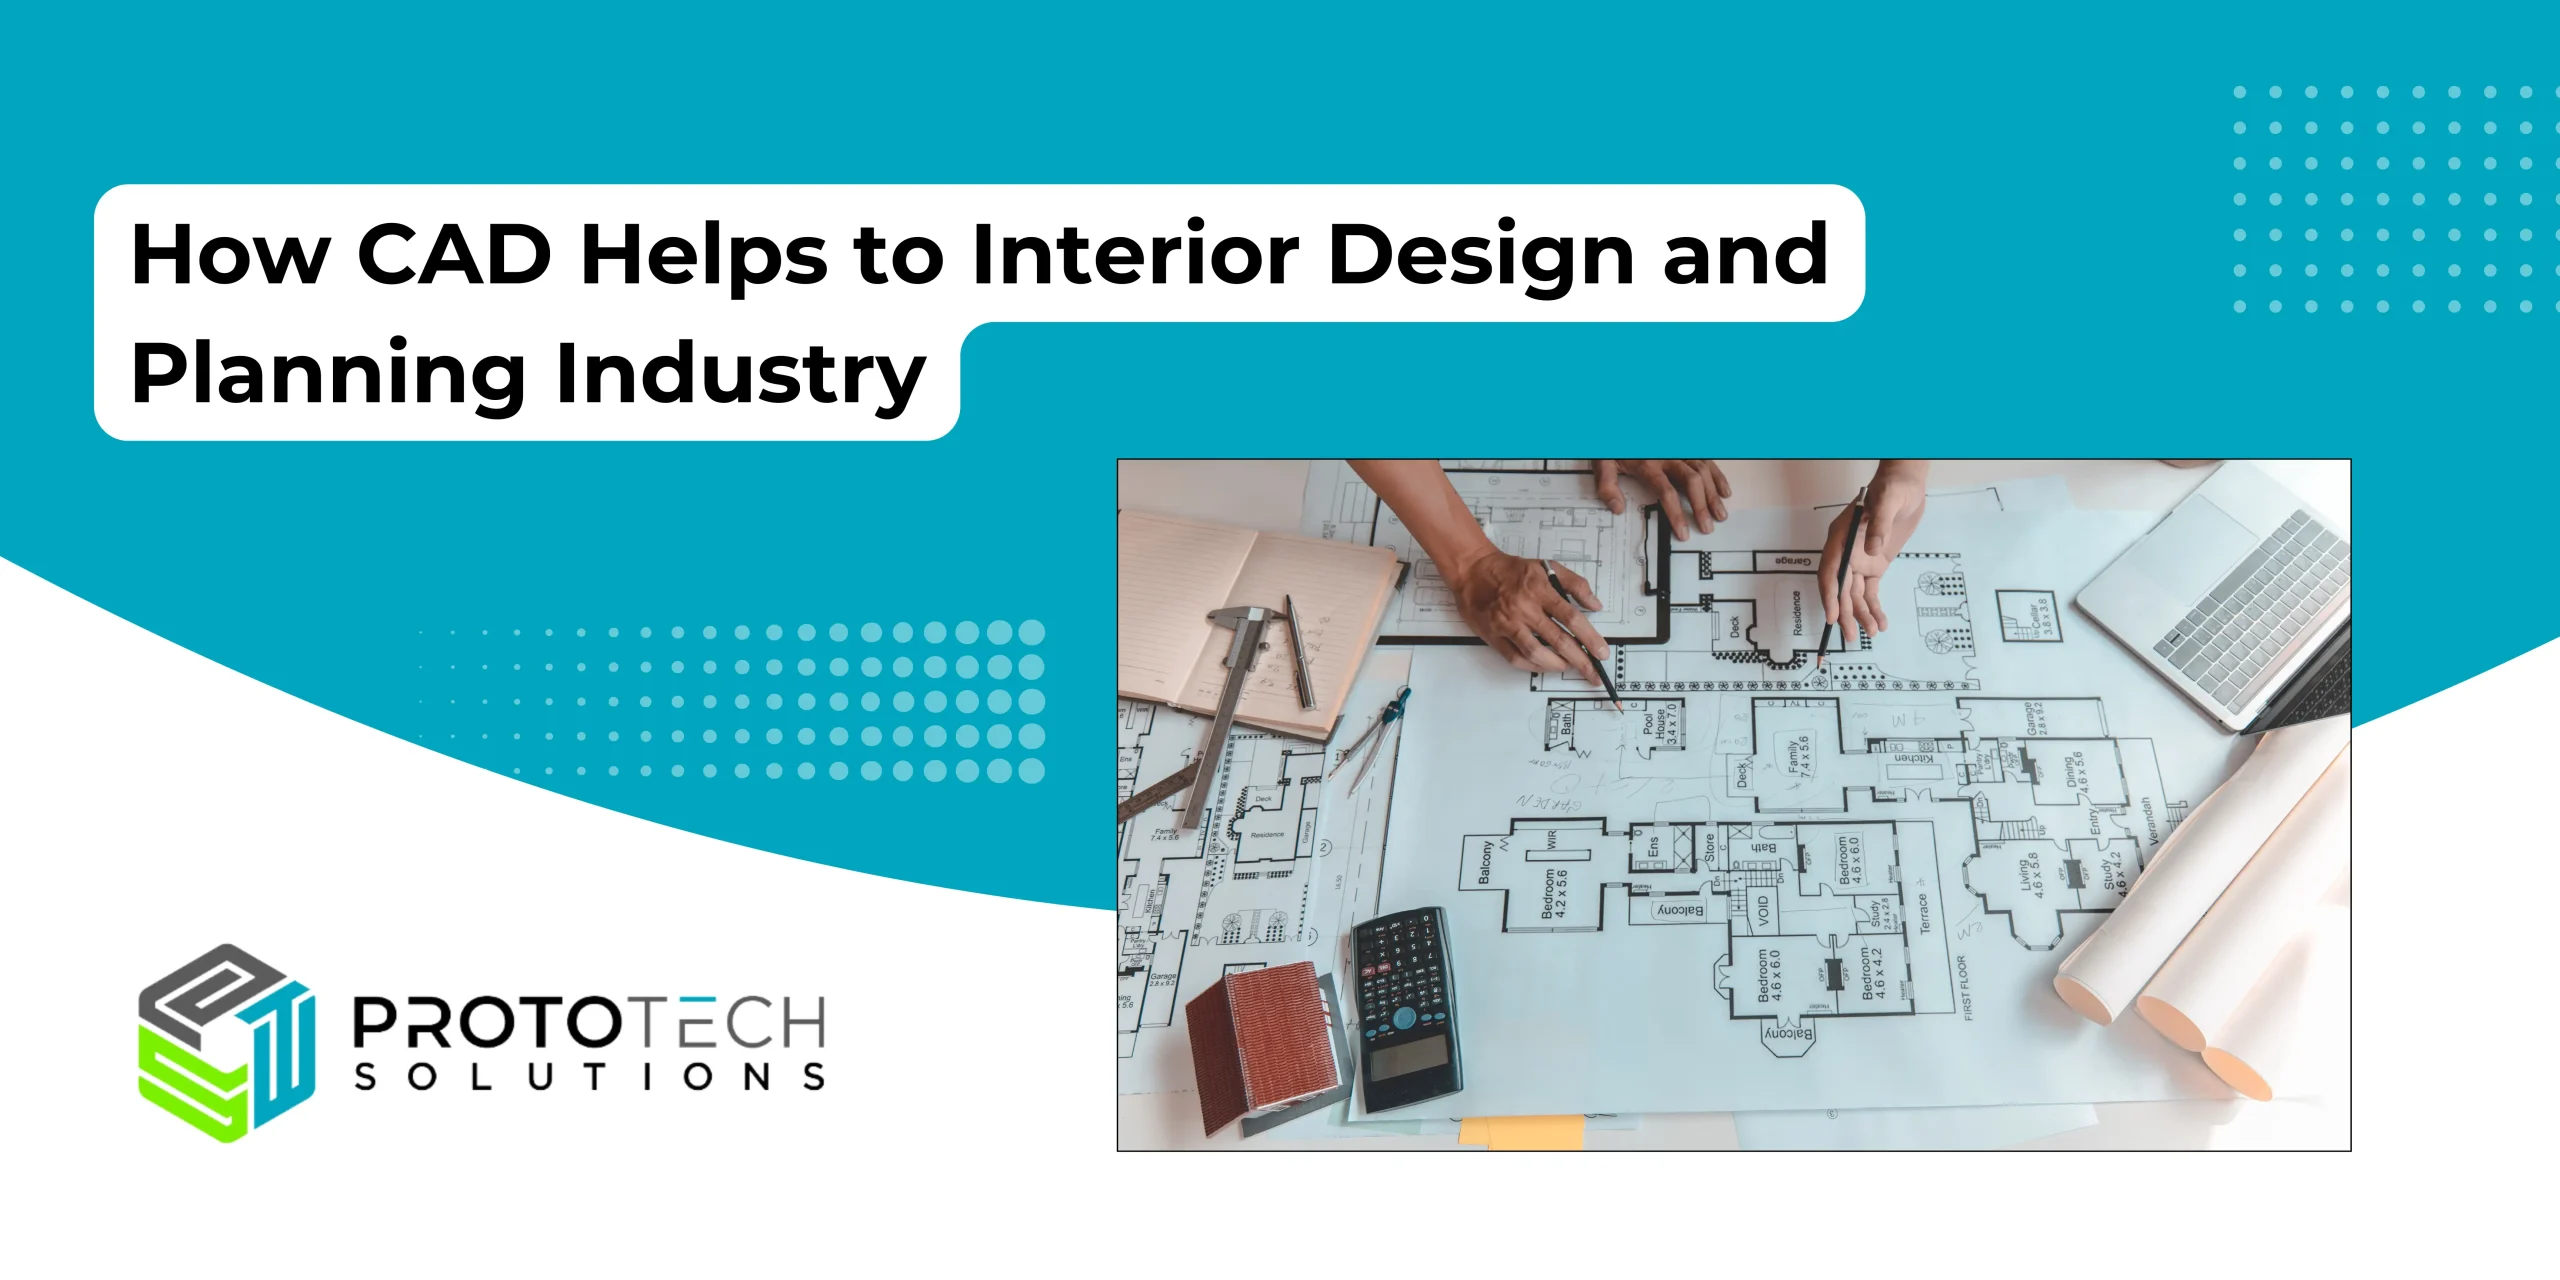 How CAD Helps to Interior Design and Planning Industry